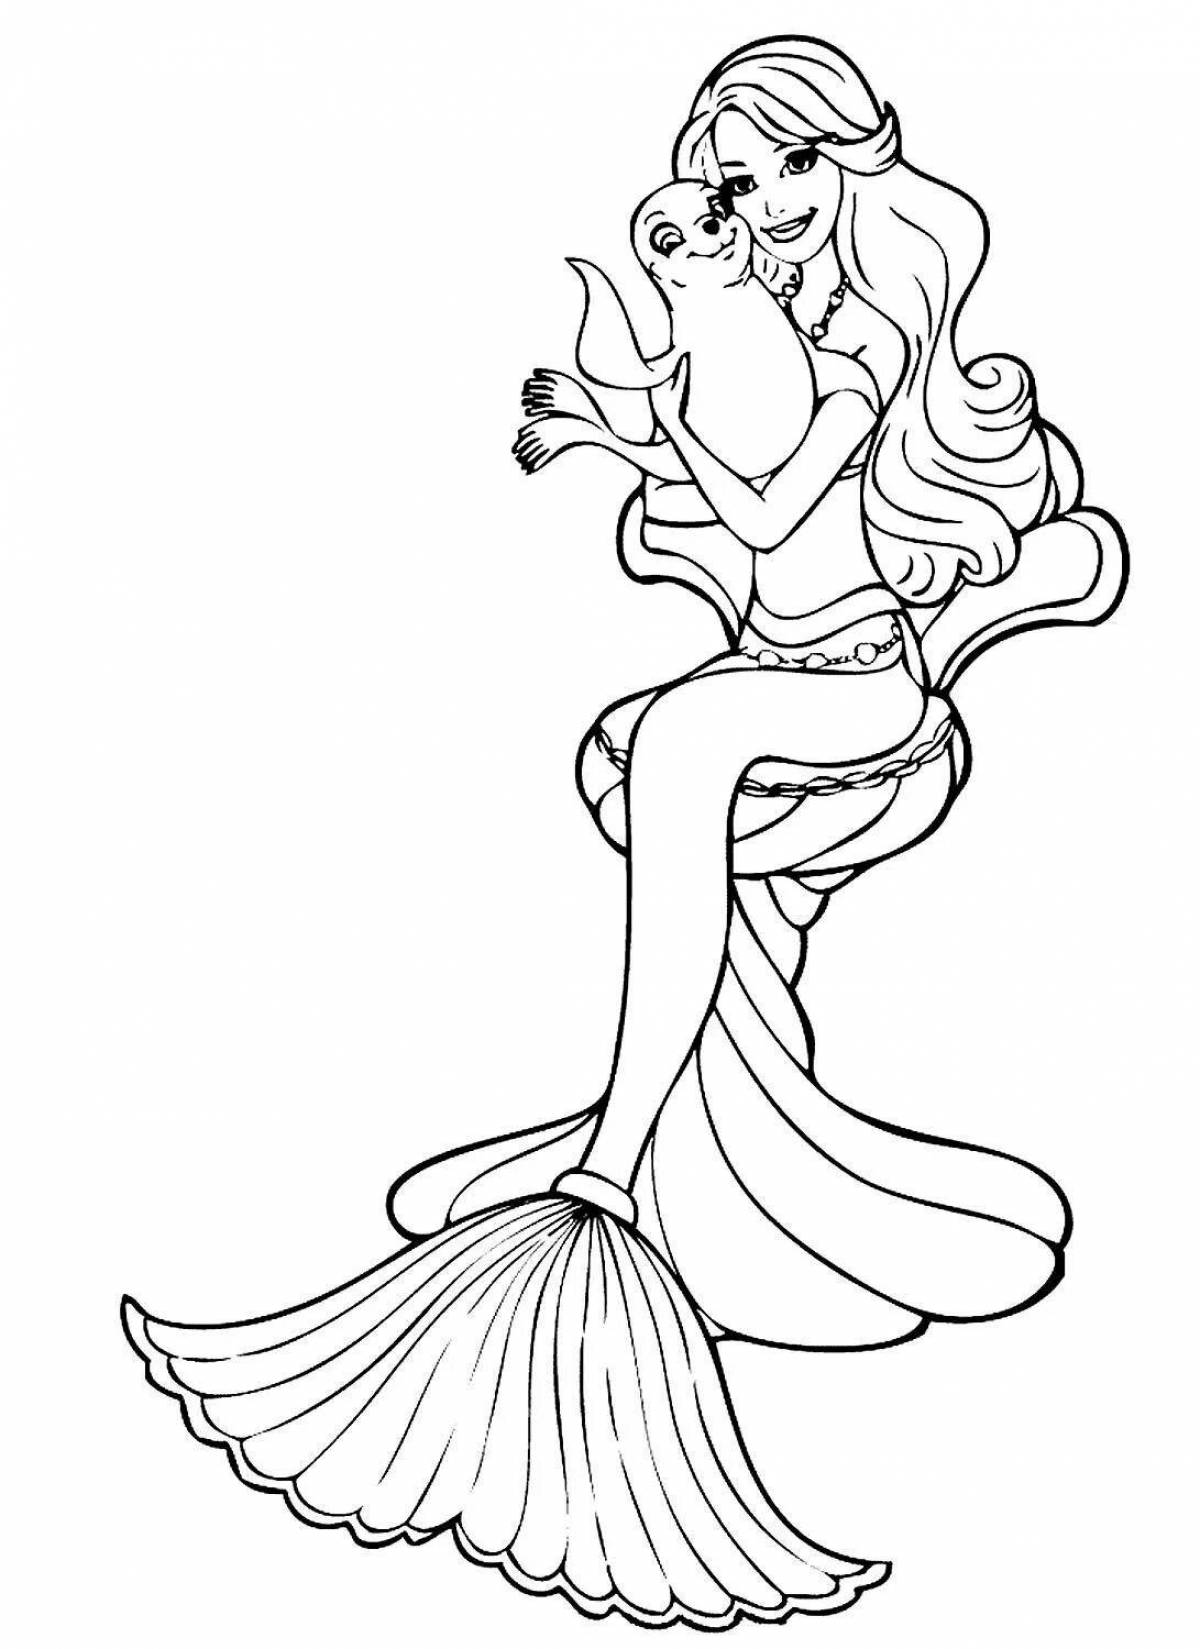 Mermaid coloring pages for girls